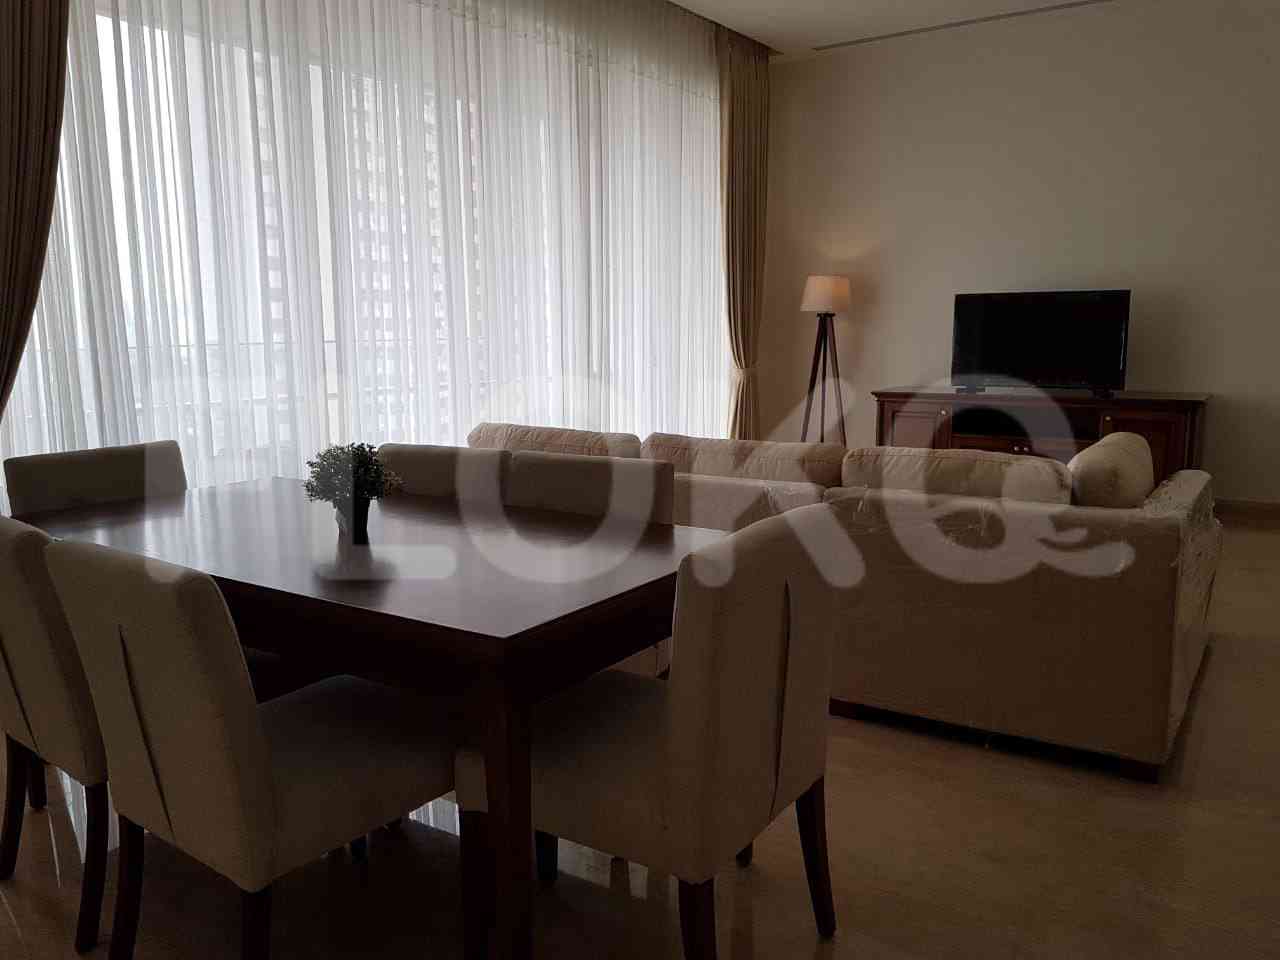 2 Bedroom on 18th Floor for Rent in Pakubuwono Spring Apartment - fga4a1 1